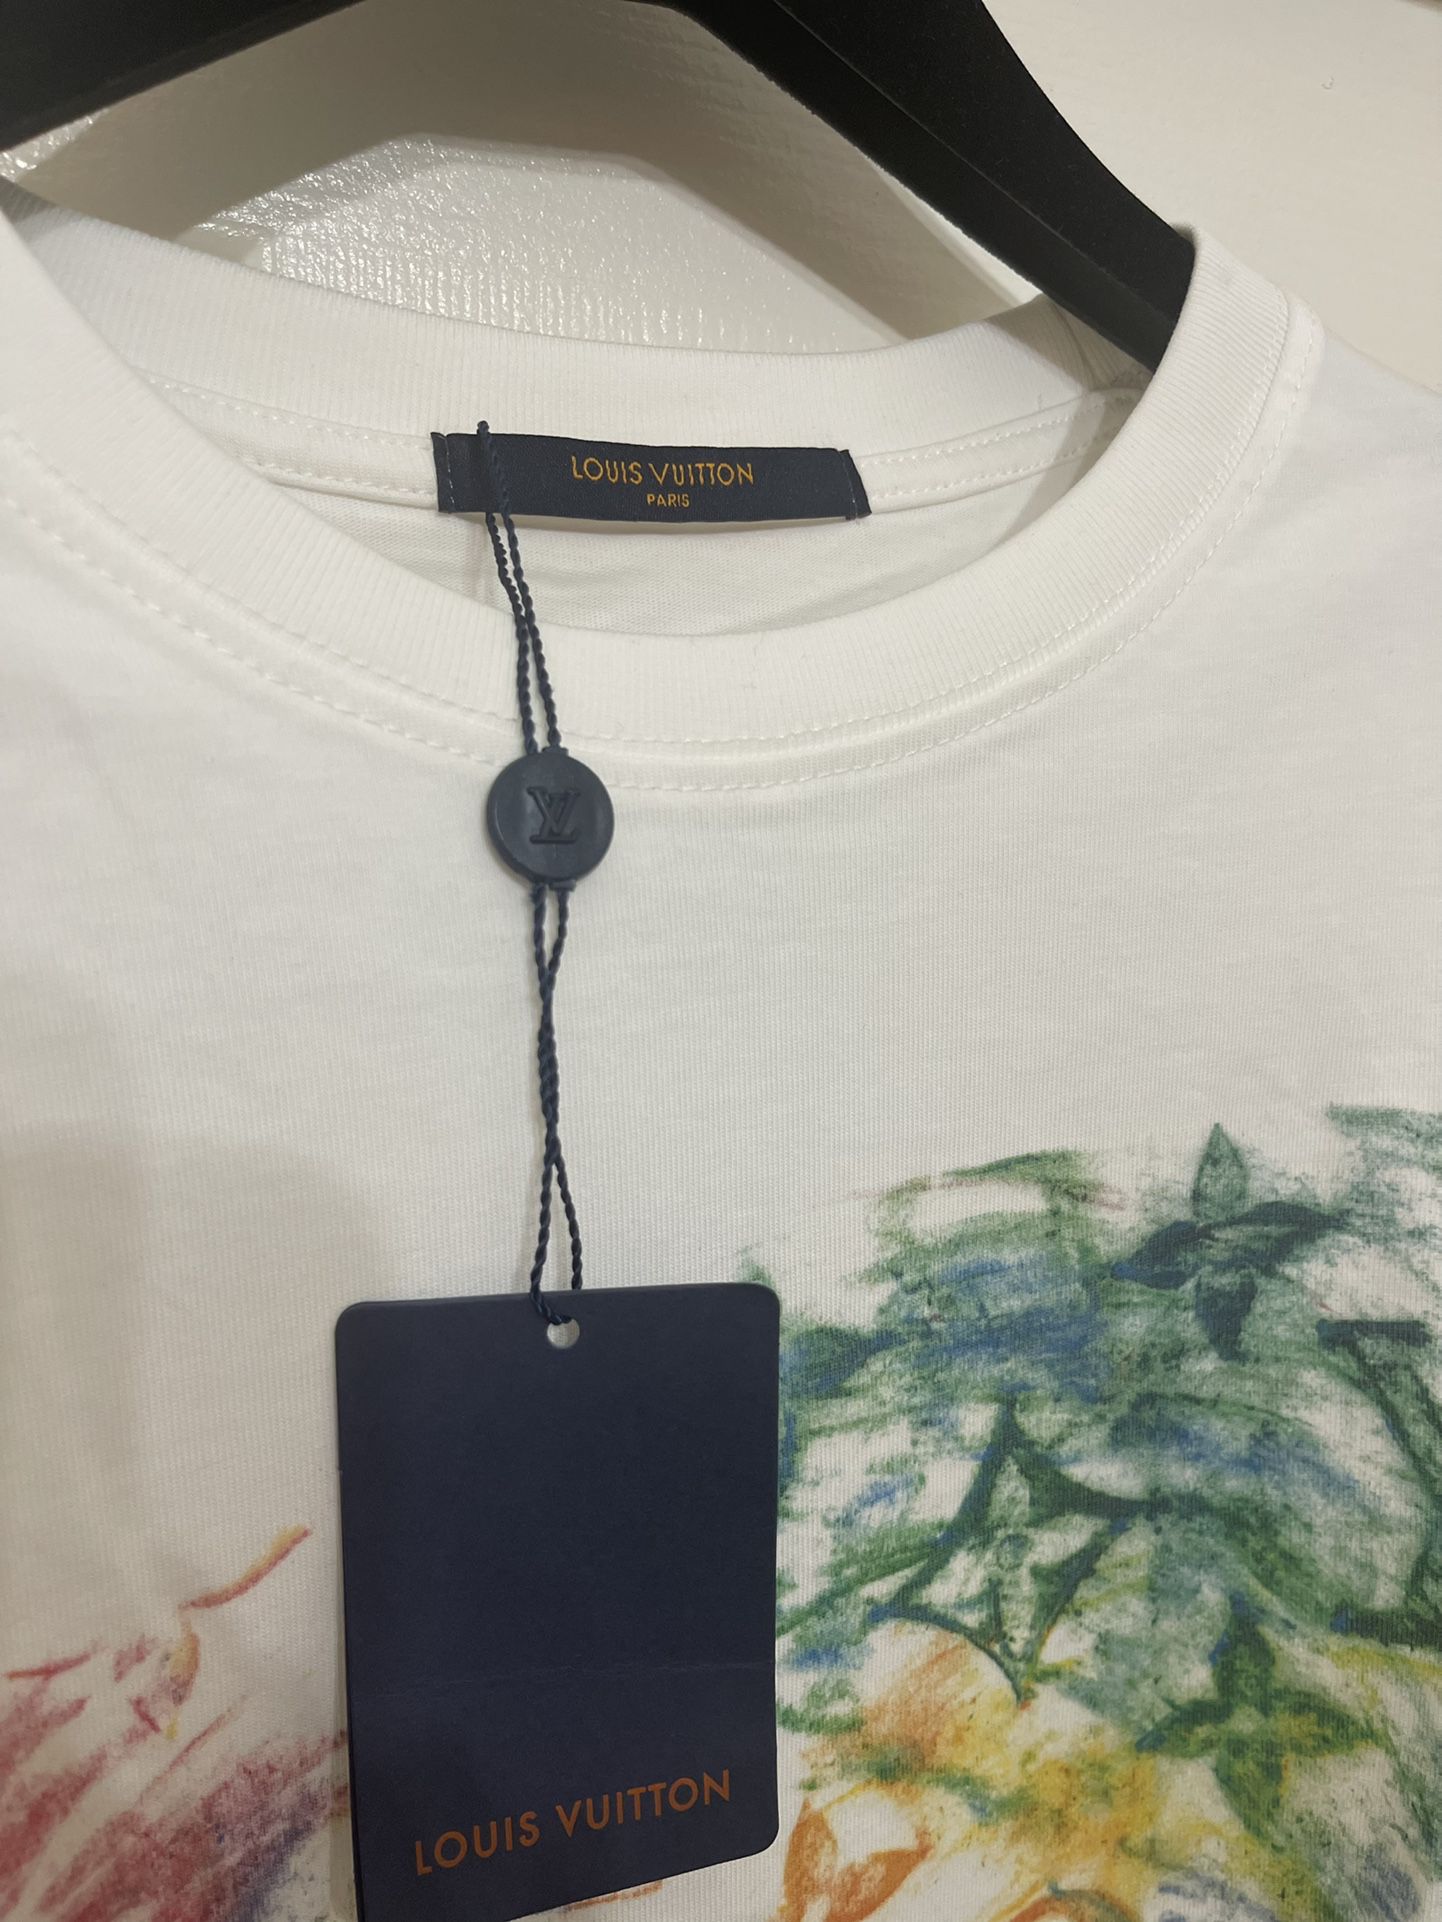 Louis Vuitton forever tee for Sale in Parkland, FL - OfferUp